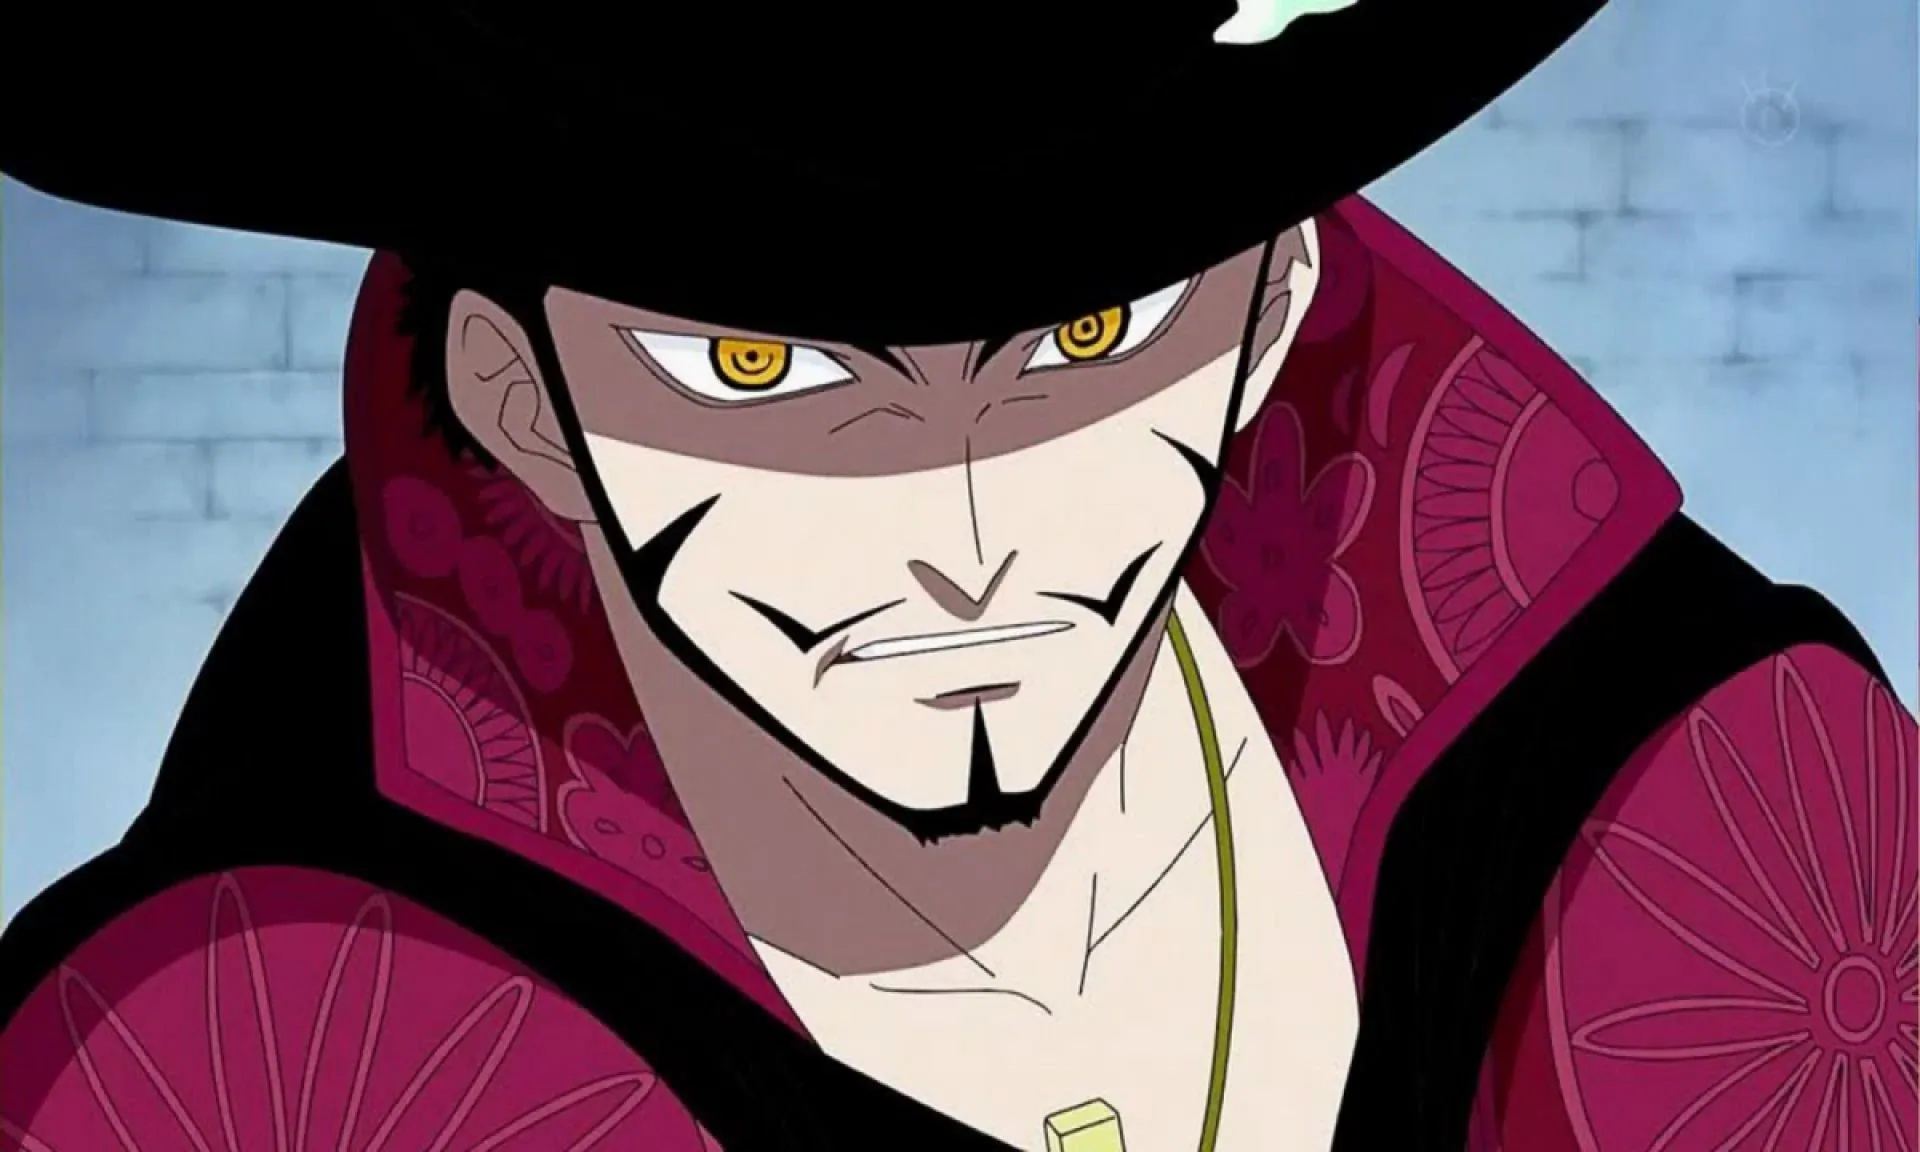 Mihawk from 'One Piece' smiling